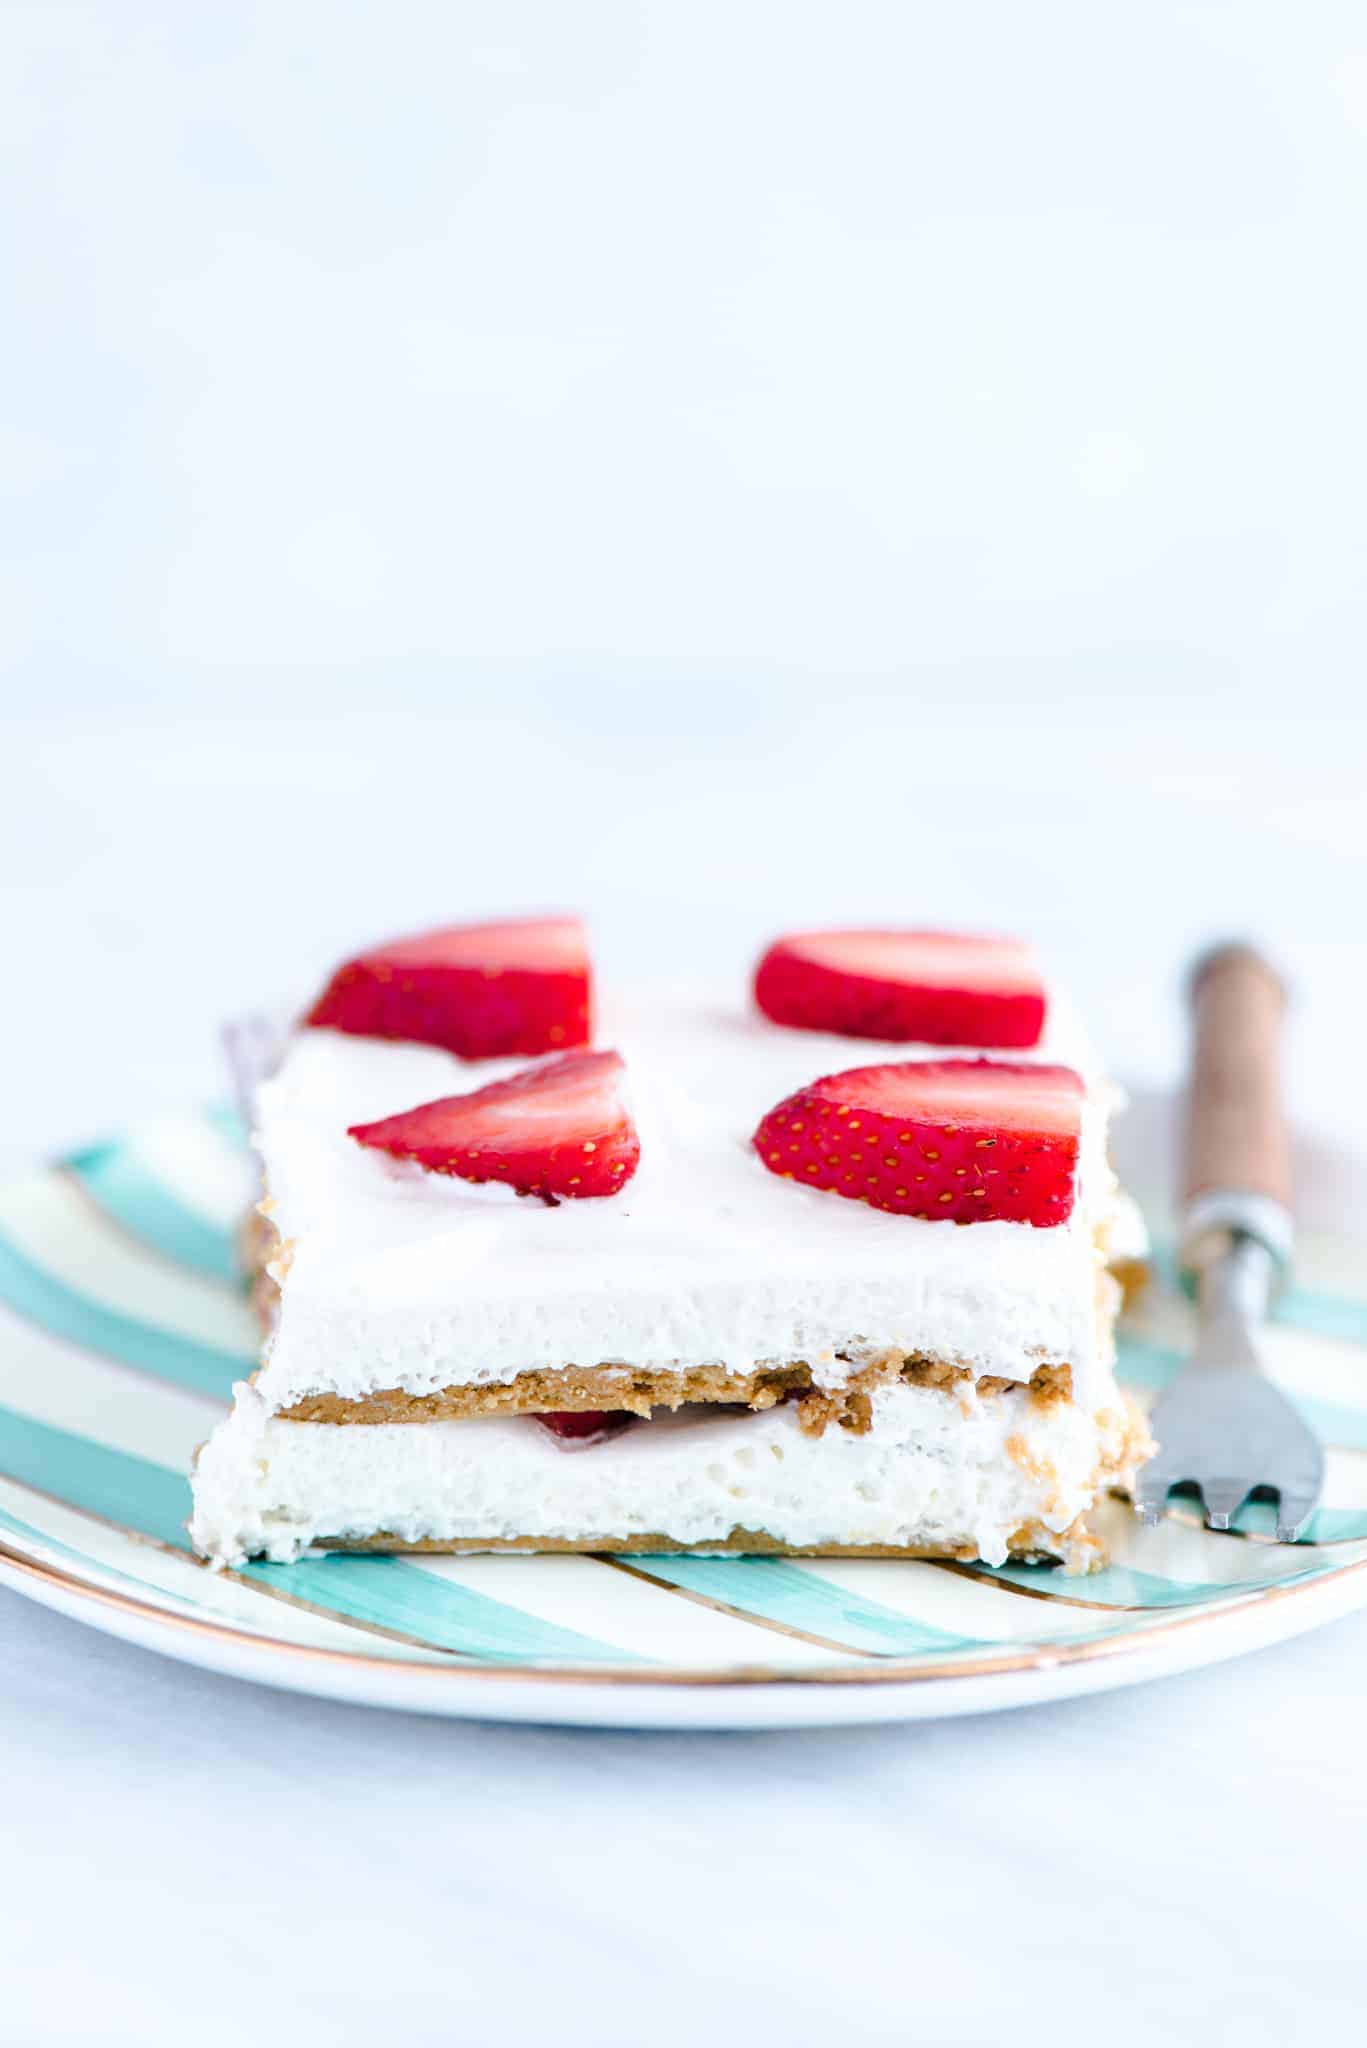 A slice of gluten free strawberry icebox cake on a green and white striped plate